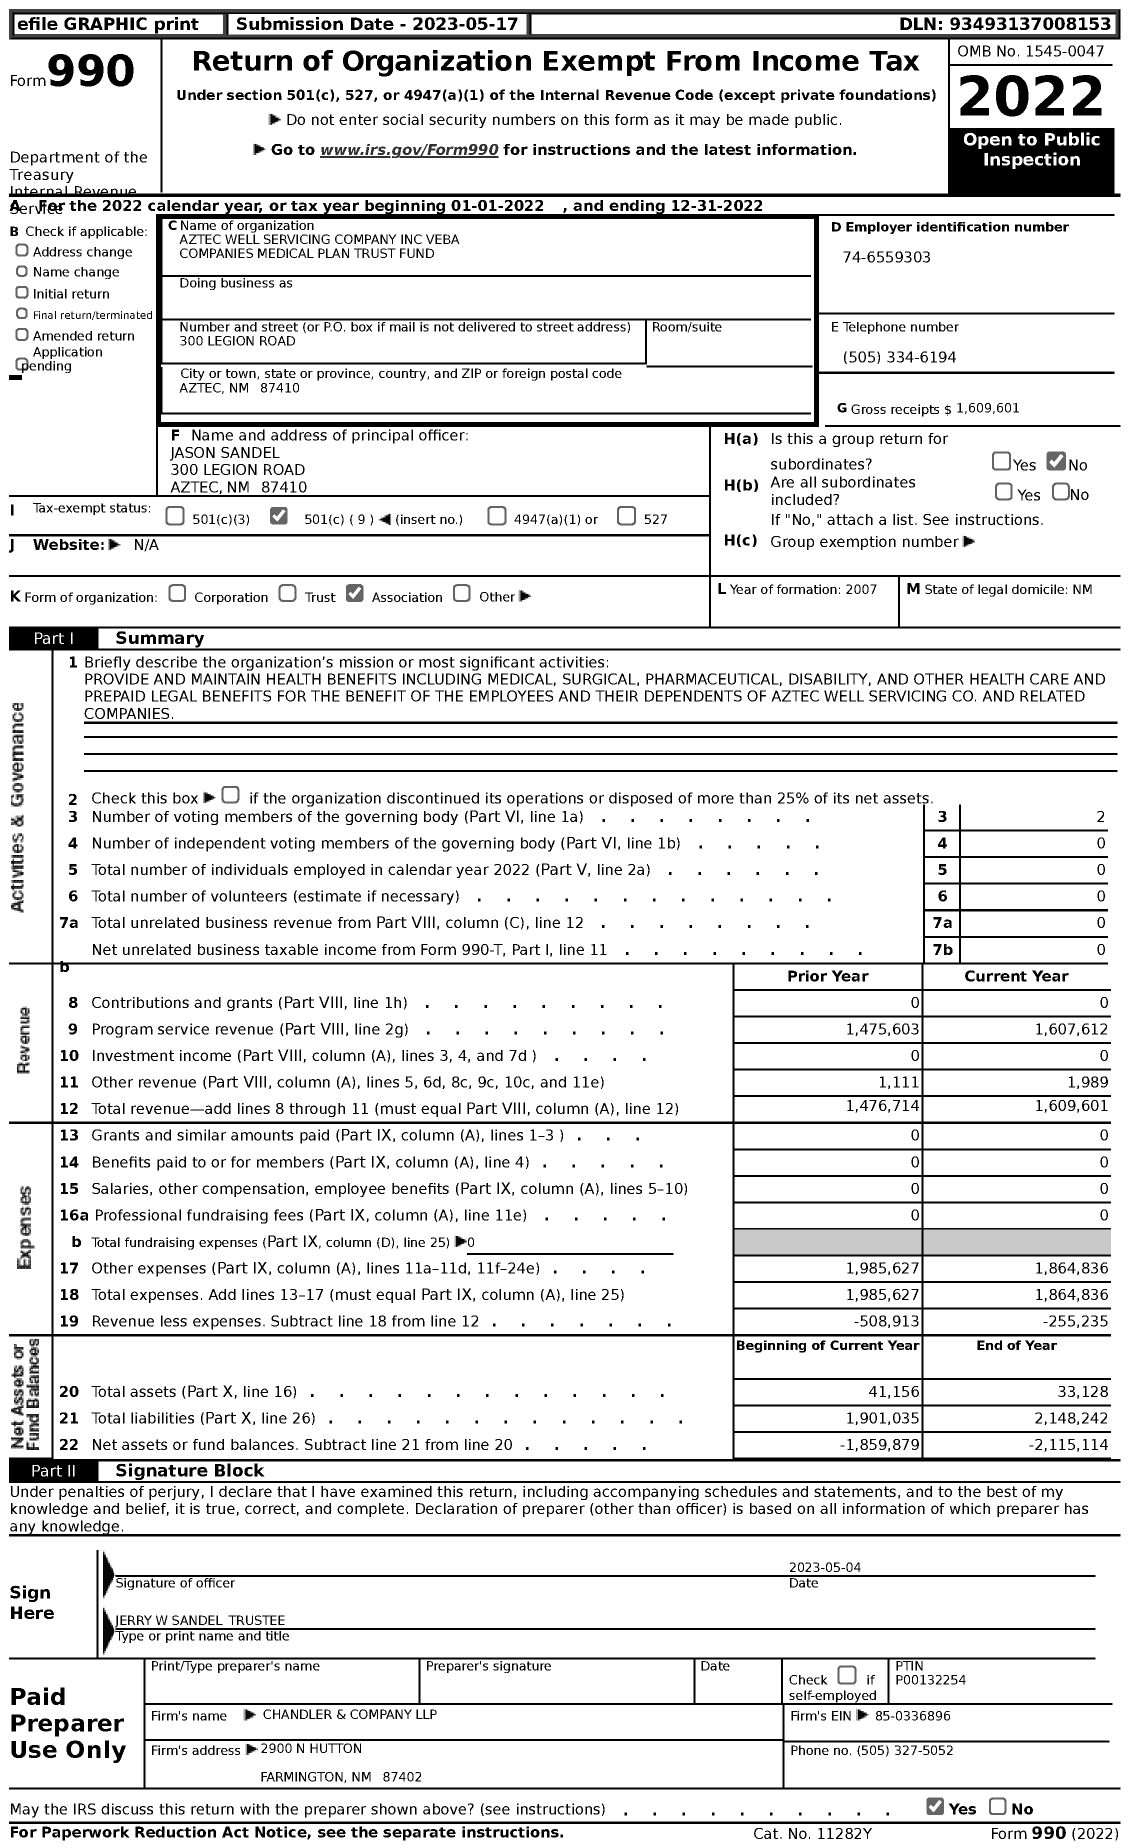 Image of first page of 2022 Form 990 for Aztec Well Servicing Company Veba Companies Medical Plan Trust Fund